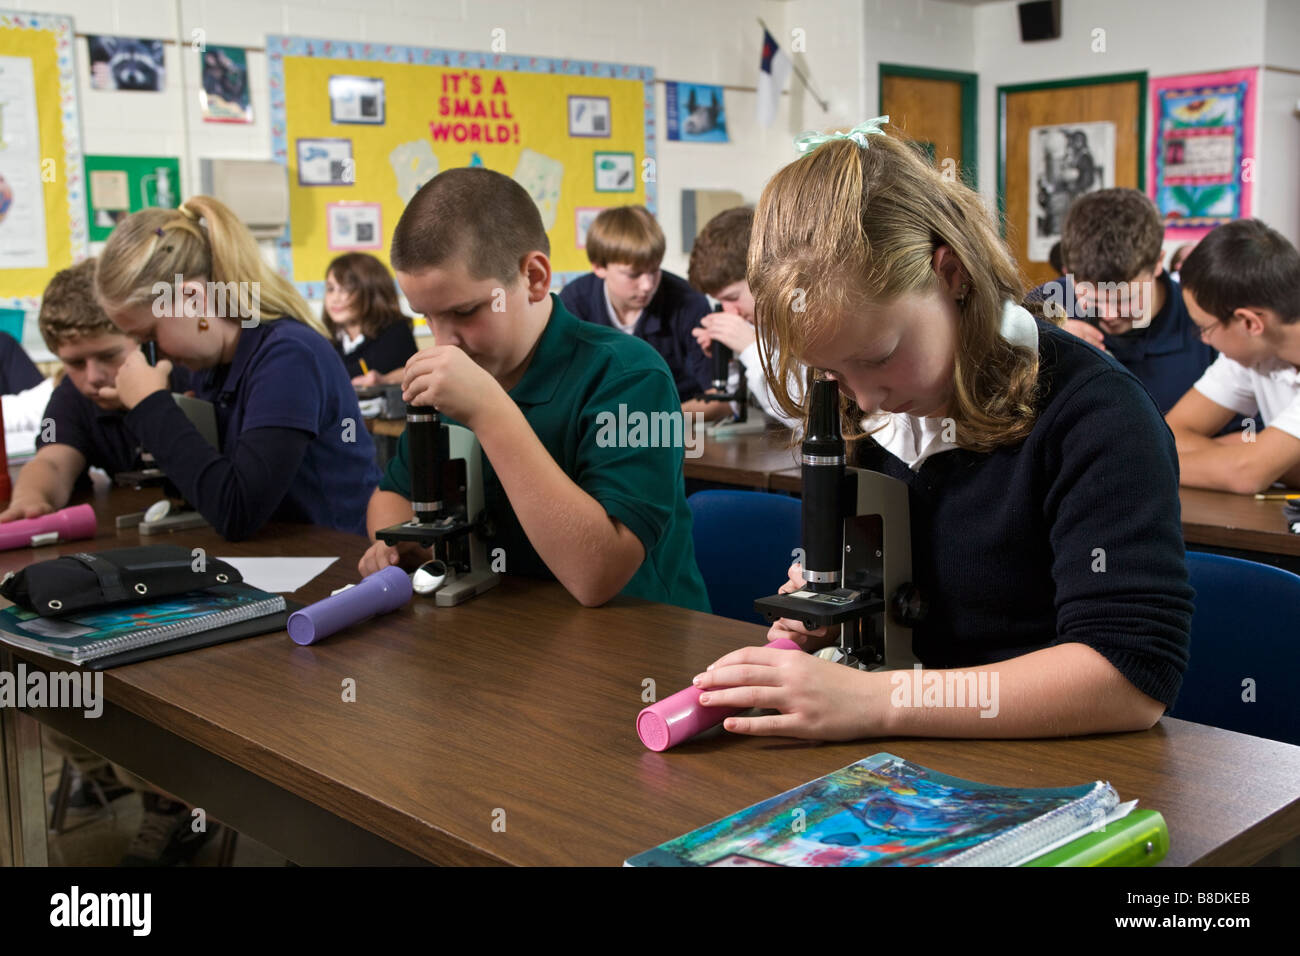 Middle school students in science classroom. Stock Photo